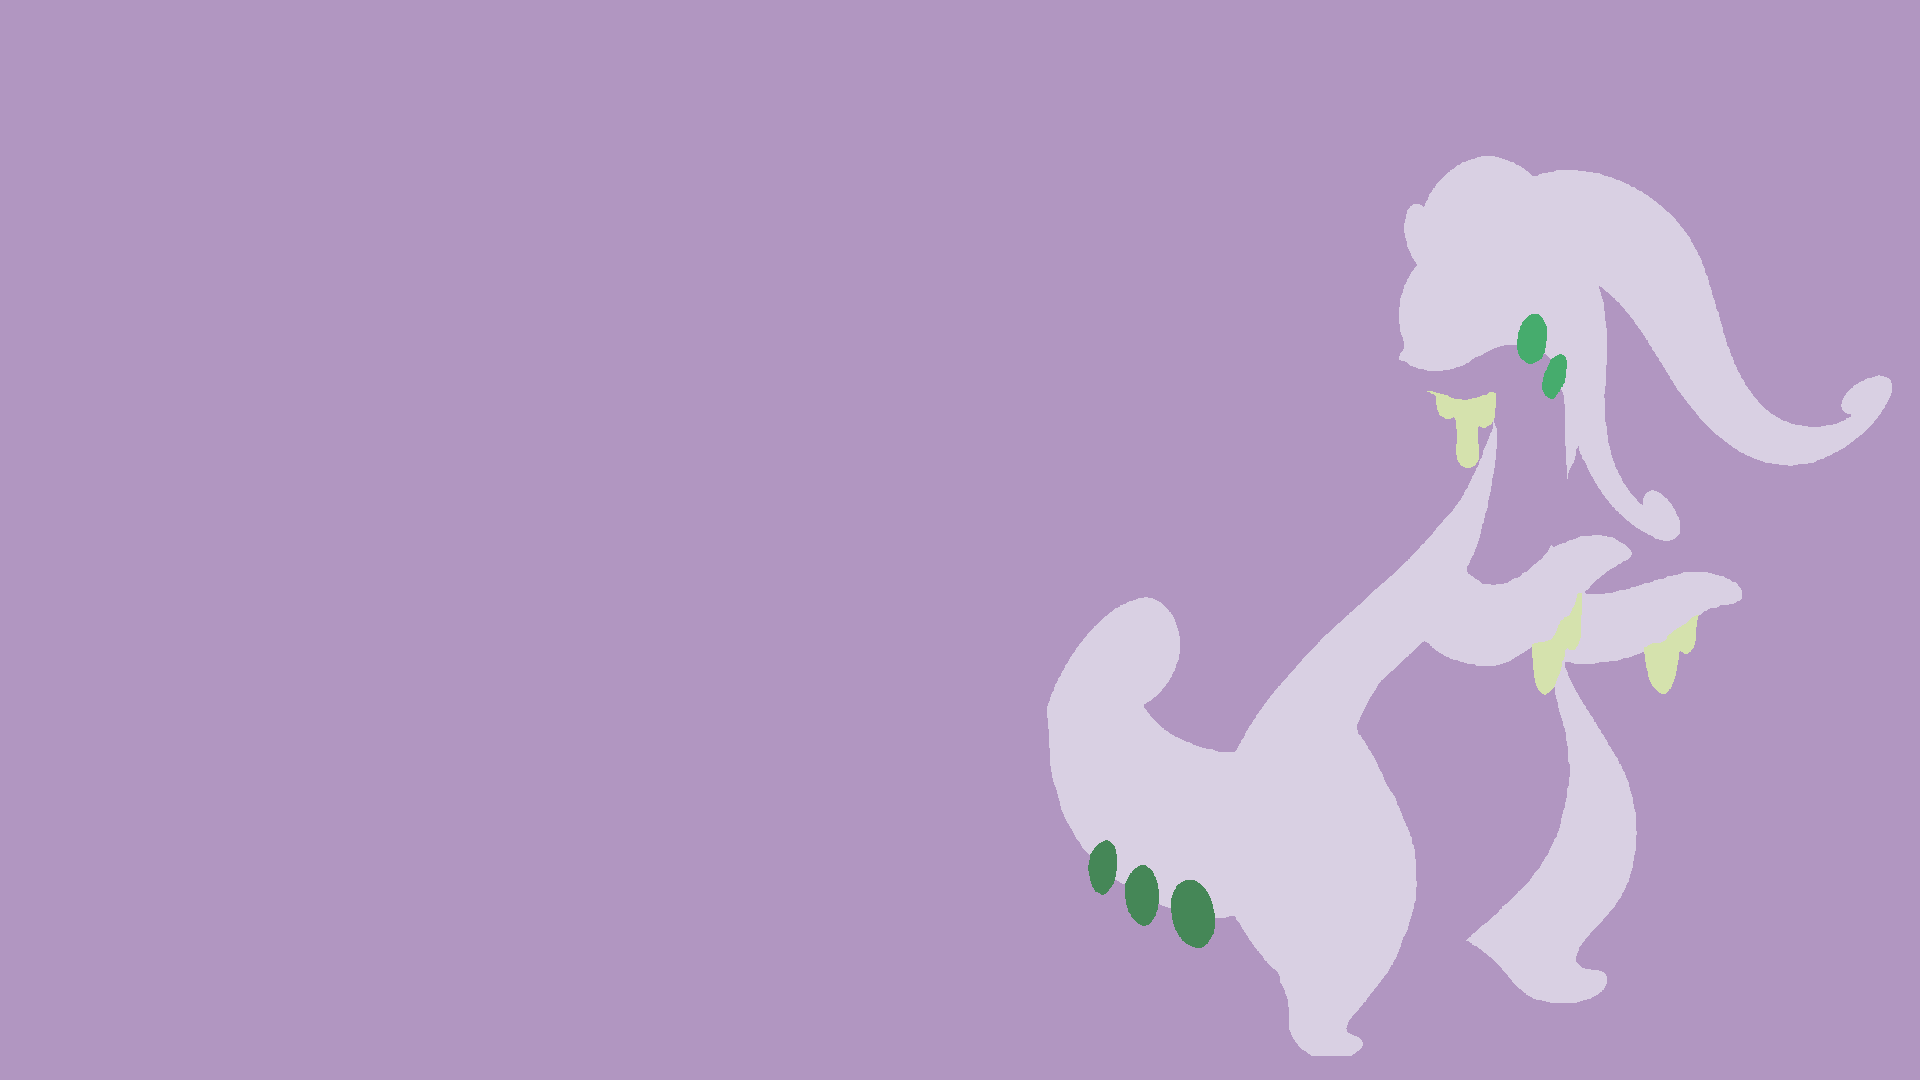 Goodra Minimalist Background that I made, with our lord in mind